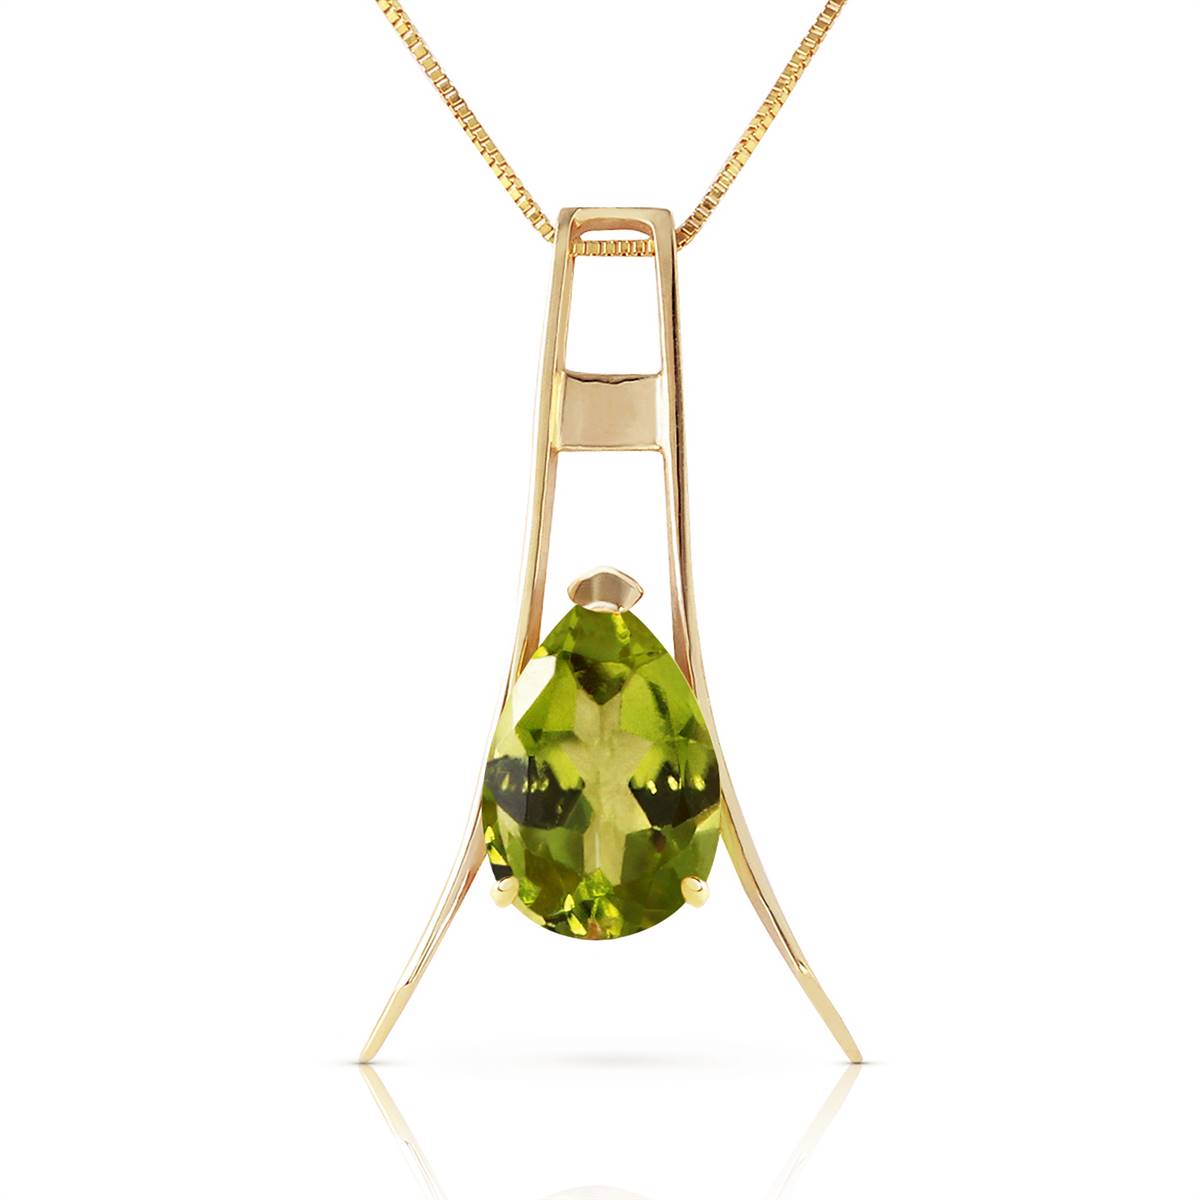 1.5 Carat 14K Solid Yellow Gold September In Paris Peridot Necklace